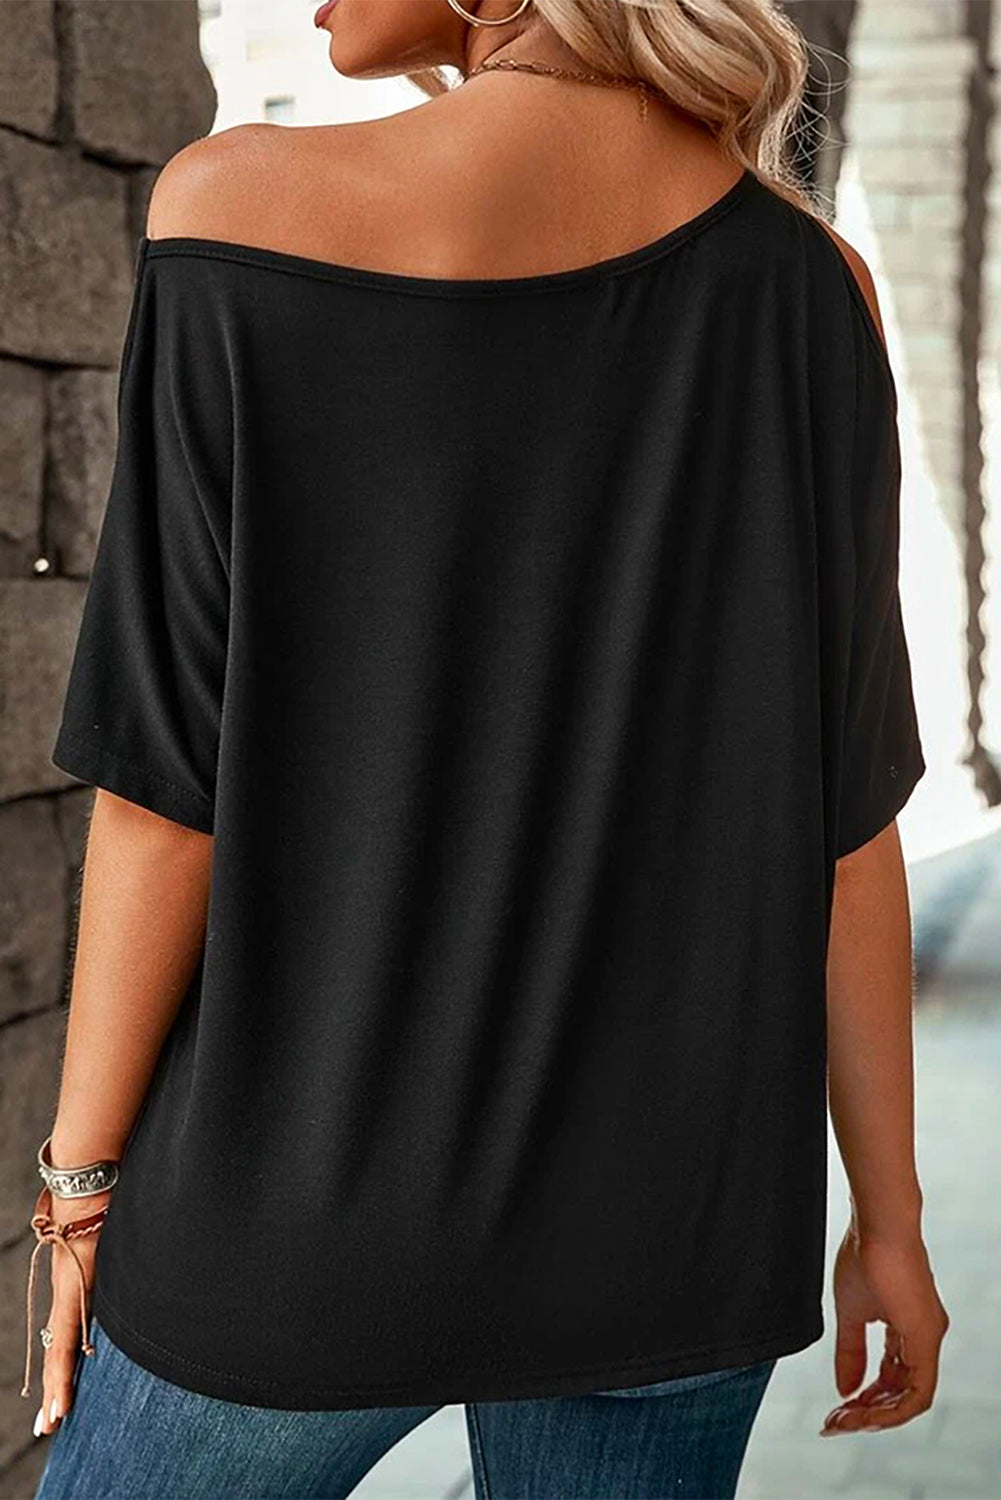 LC25221344-2-S, LC25221344-2-M, LC25221344-2-L, LC25221344-2-XL, Black Solid Asymmetrical Neck Loose Casual T-Shirt